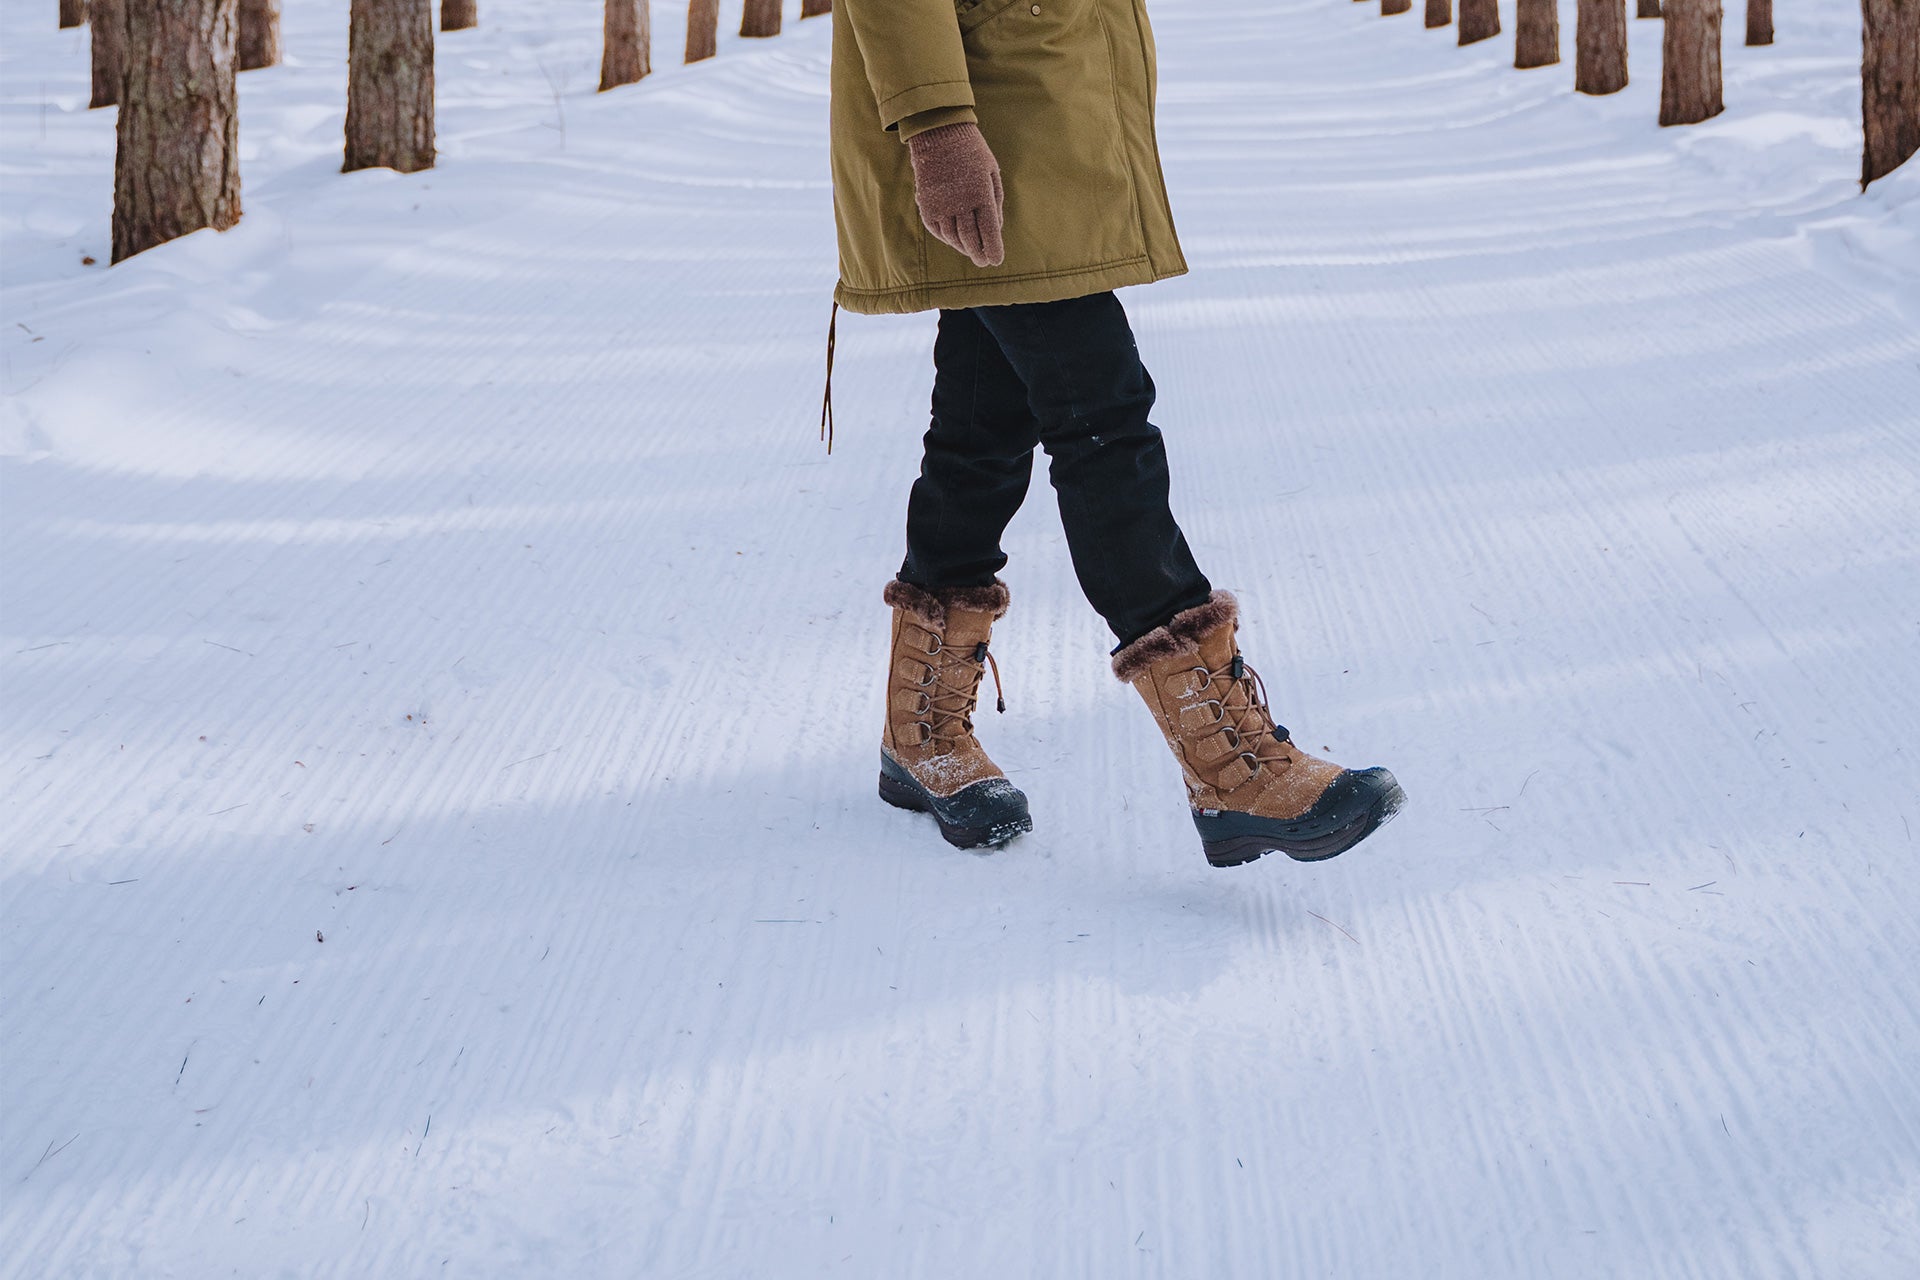 Women's Winter Boots – Baffin - Born in the North '79